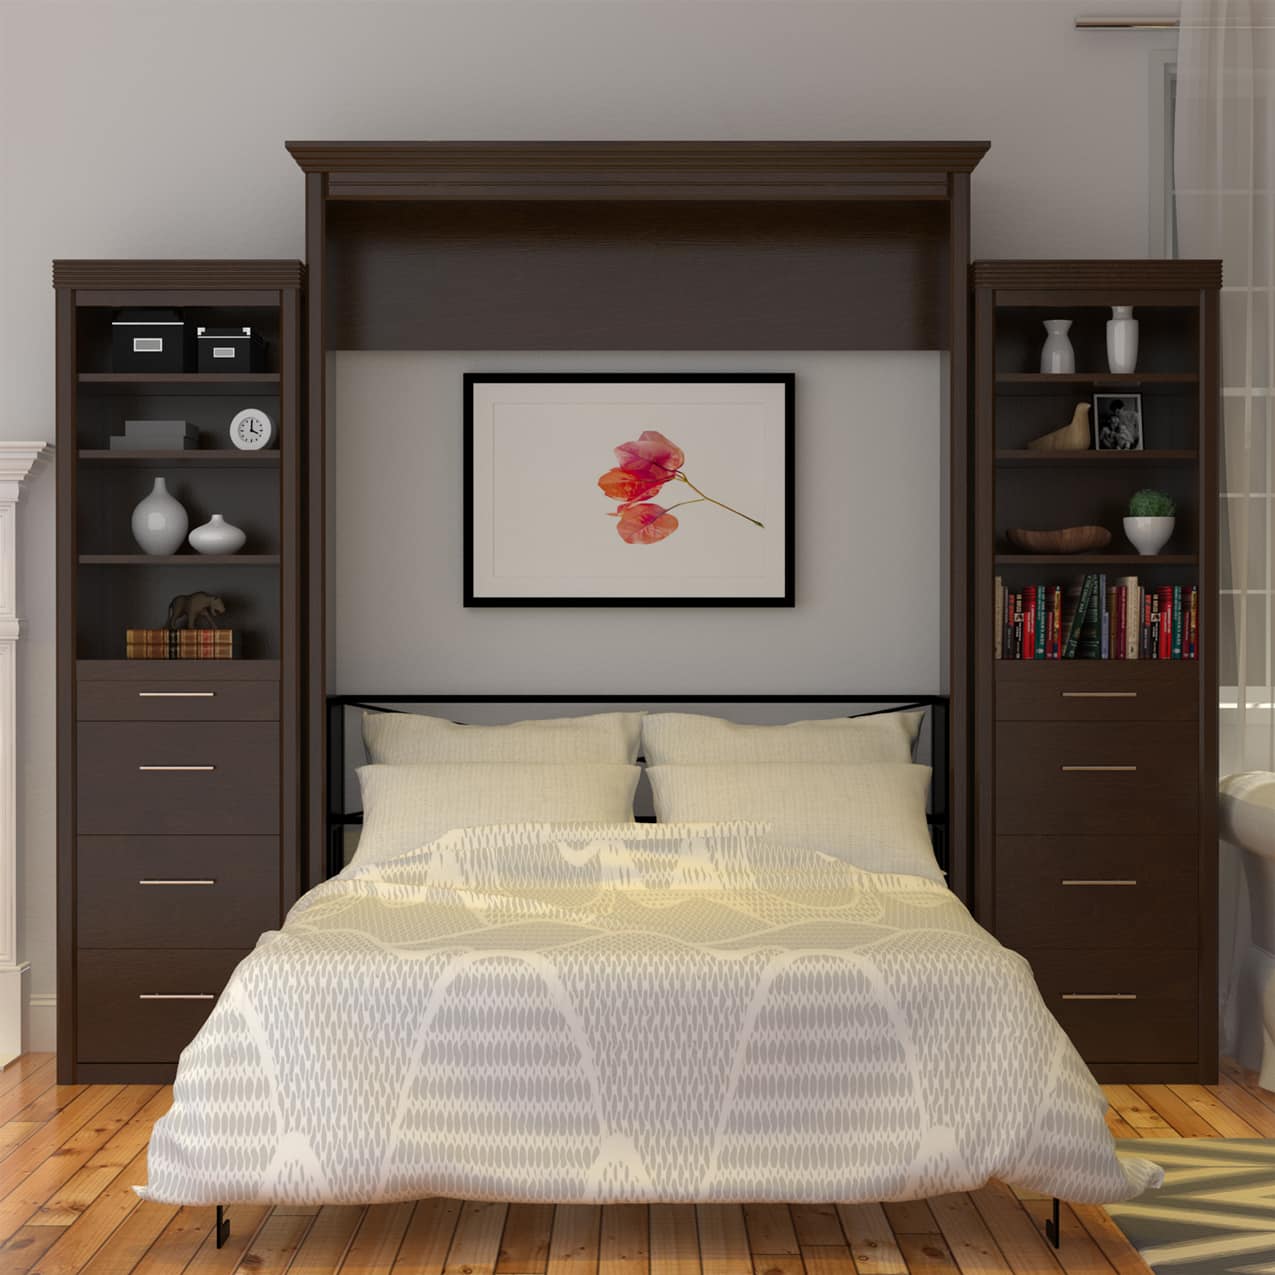 coventry queen murphy bed with storage bed open hidden hideaway hide away hide-a-way diy murphy bed kit fold out pull down wall bed cabinet guest bed customizable storage adjustable shelves pullout nighstand drawers